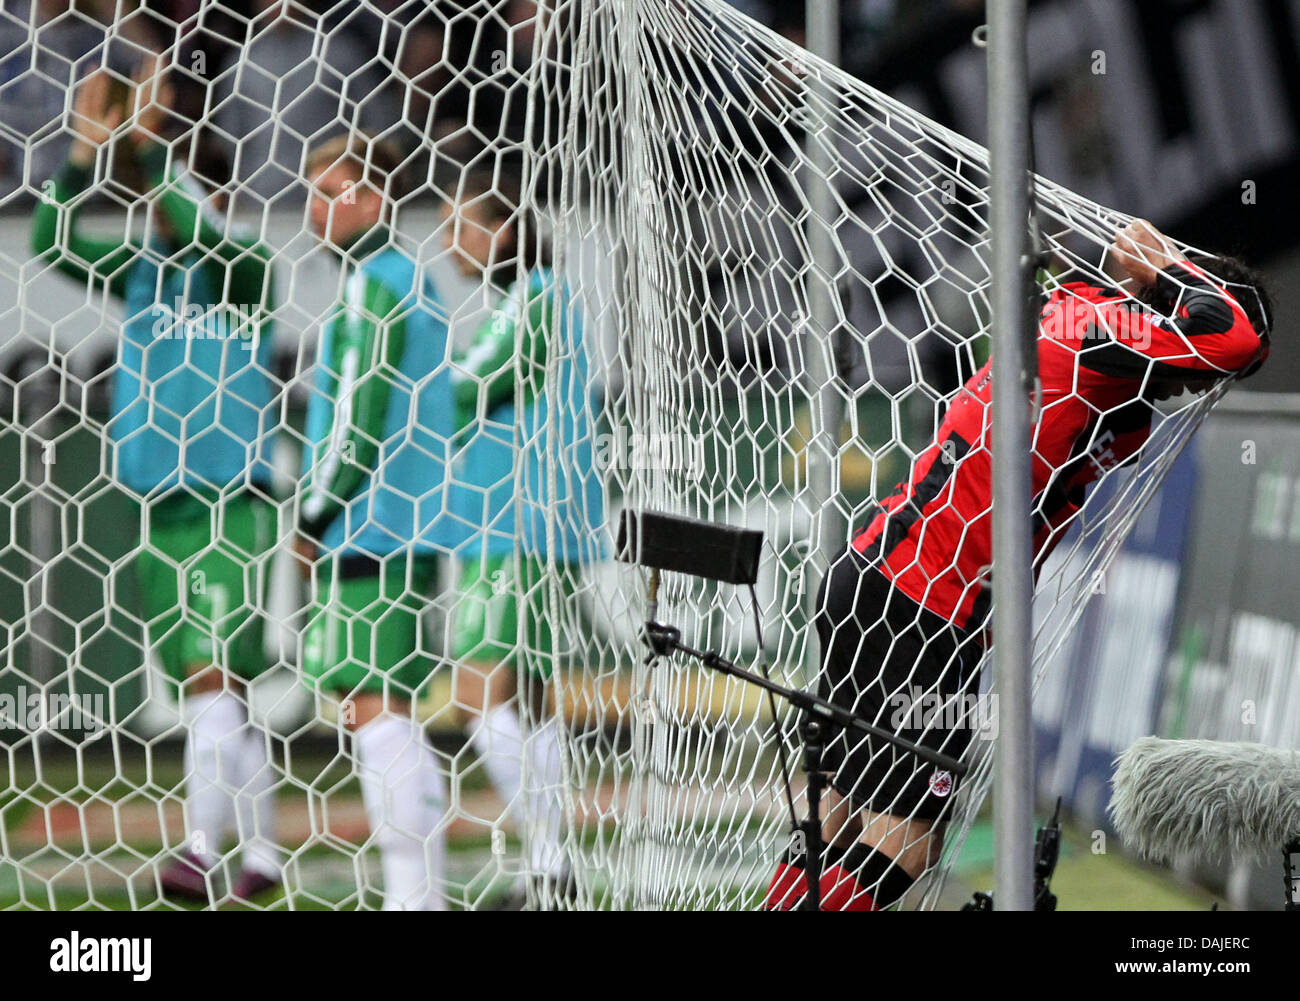 Frankfurt's Theofanis Gekas (R) leans stunned against the net in Bremen's goal after missing a chance to score a goal in the Bundesliga soccer match between Eintracht Frankfurt and Werder Bremen at the Commerzbank-Arena soccer stadium in Frankfurt, Germany, 8 April 2011. Photo: Frank Rumpenhorst Stock Photo